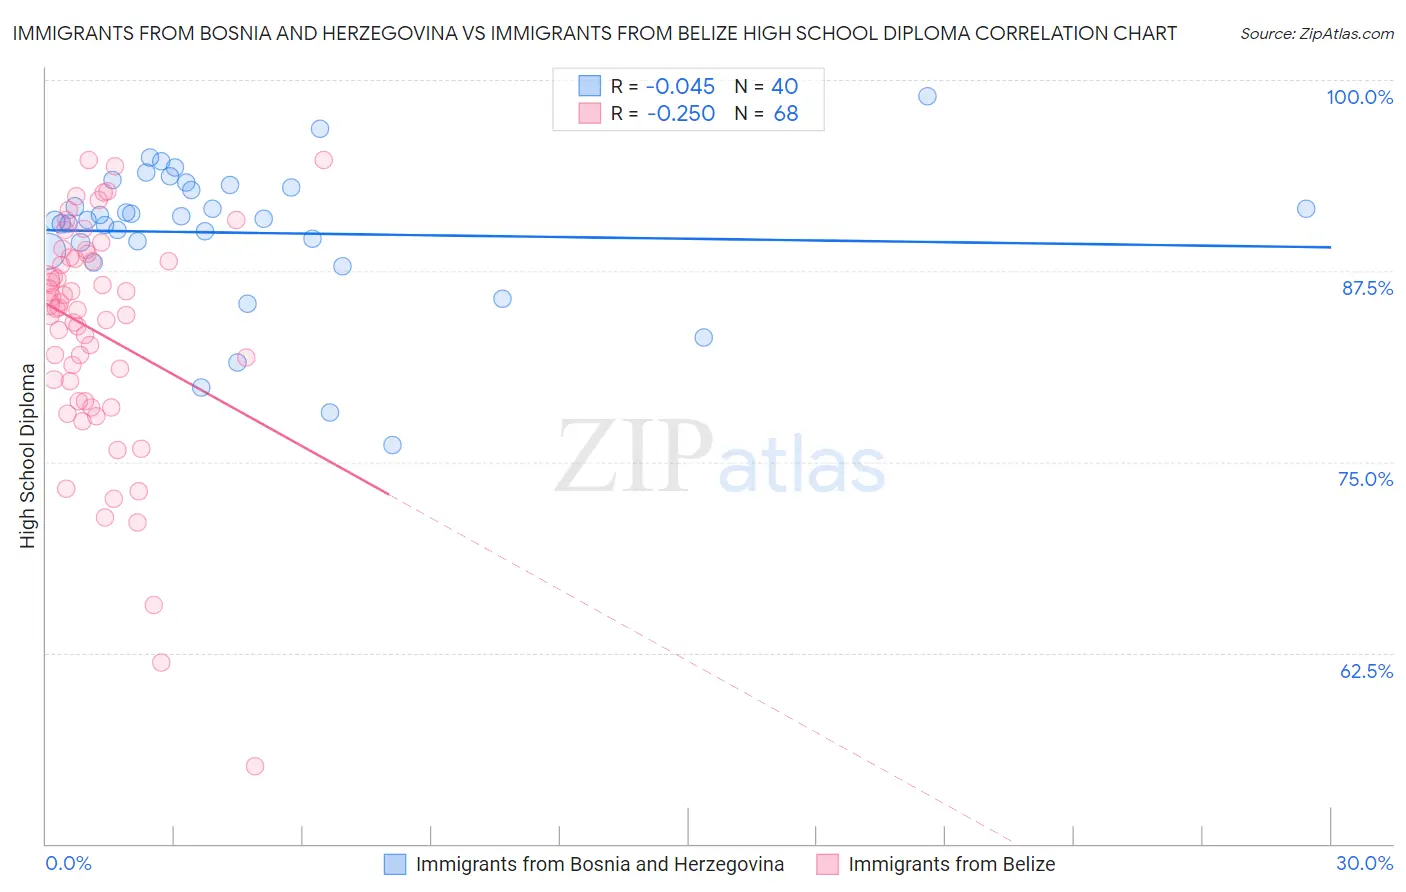 Immigrants from Bosnia and Herzegovina vs Immigrants from Belize High School Diploma